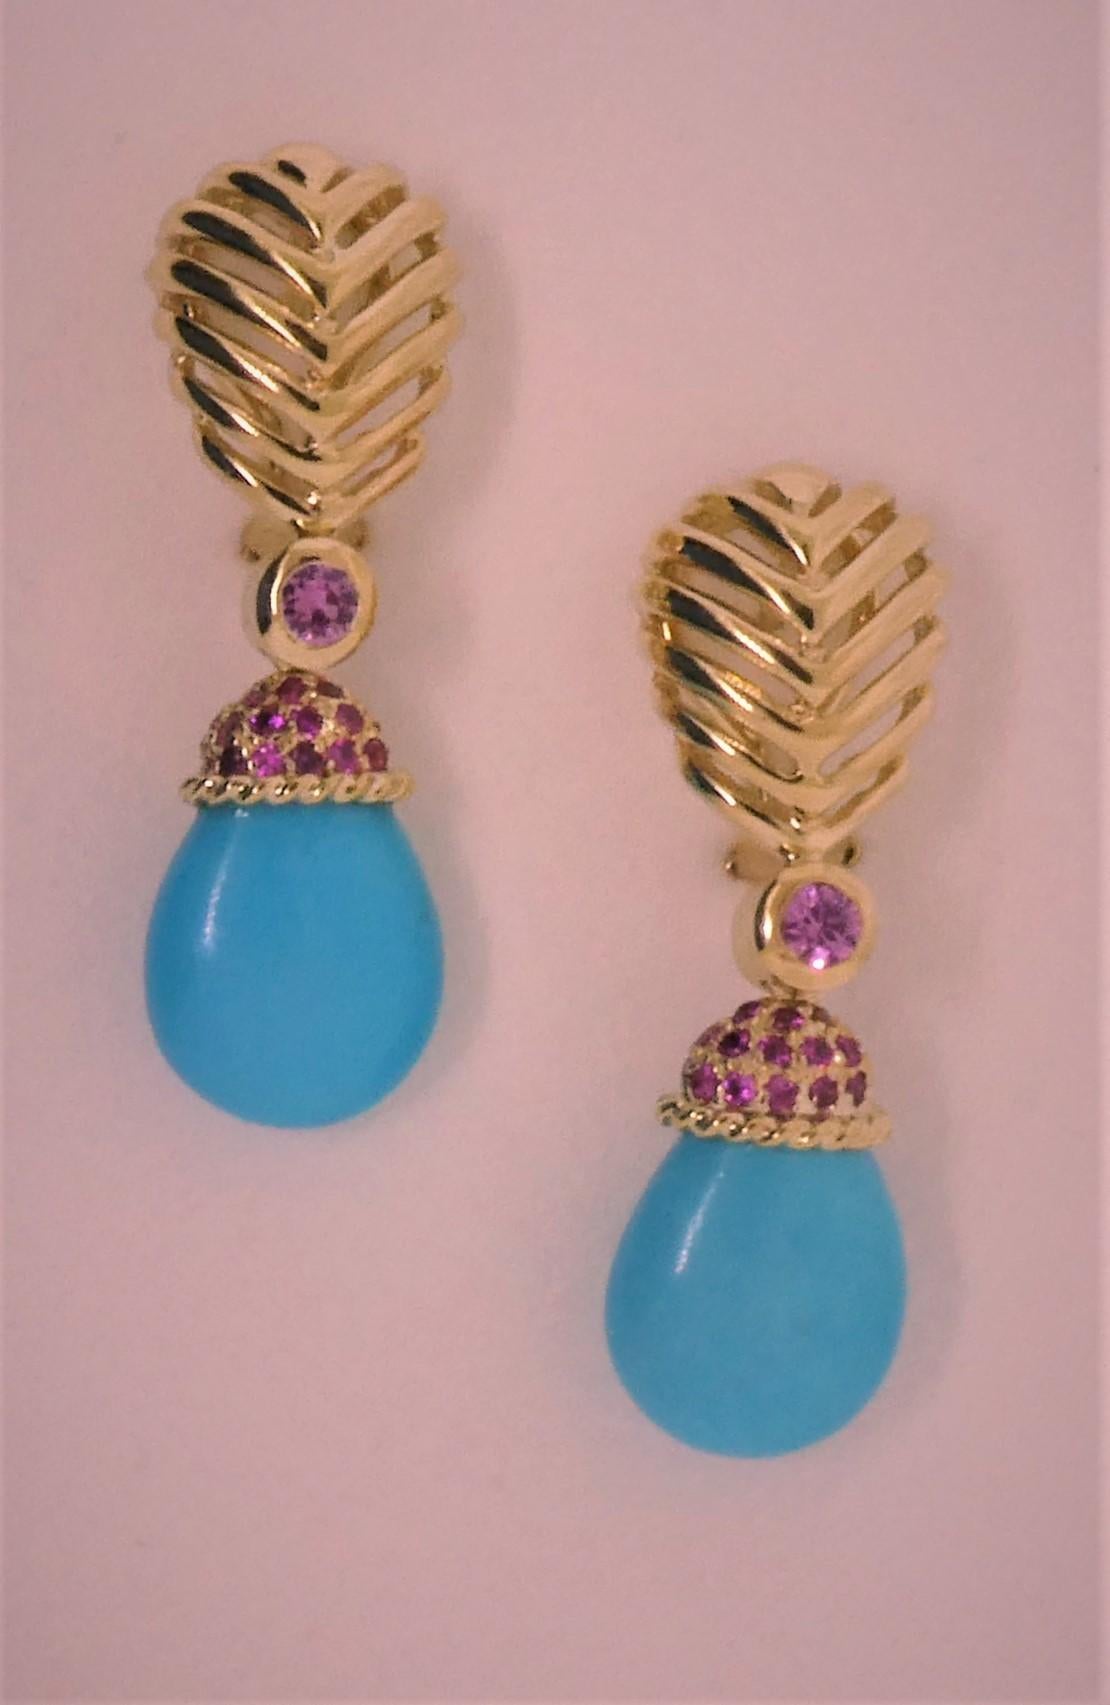 Created by Michael Engelhardt, this lovely pair of Turquoise drop earrings is really easy and light to wear.  With the use of a clip and post to make the earrings lighter on the ear, the Turquoise drops hang from an 18 Karat yellow gold cap set with